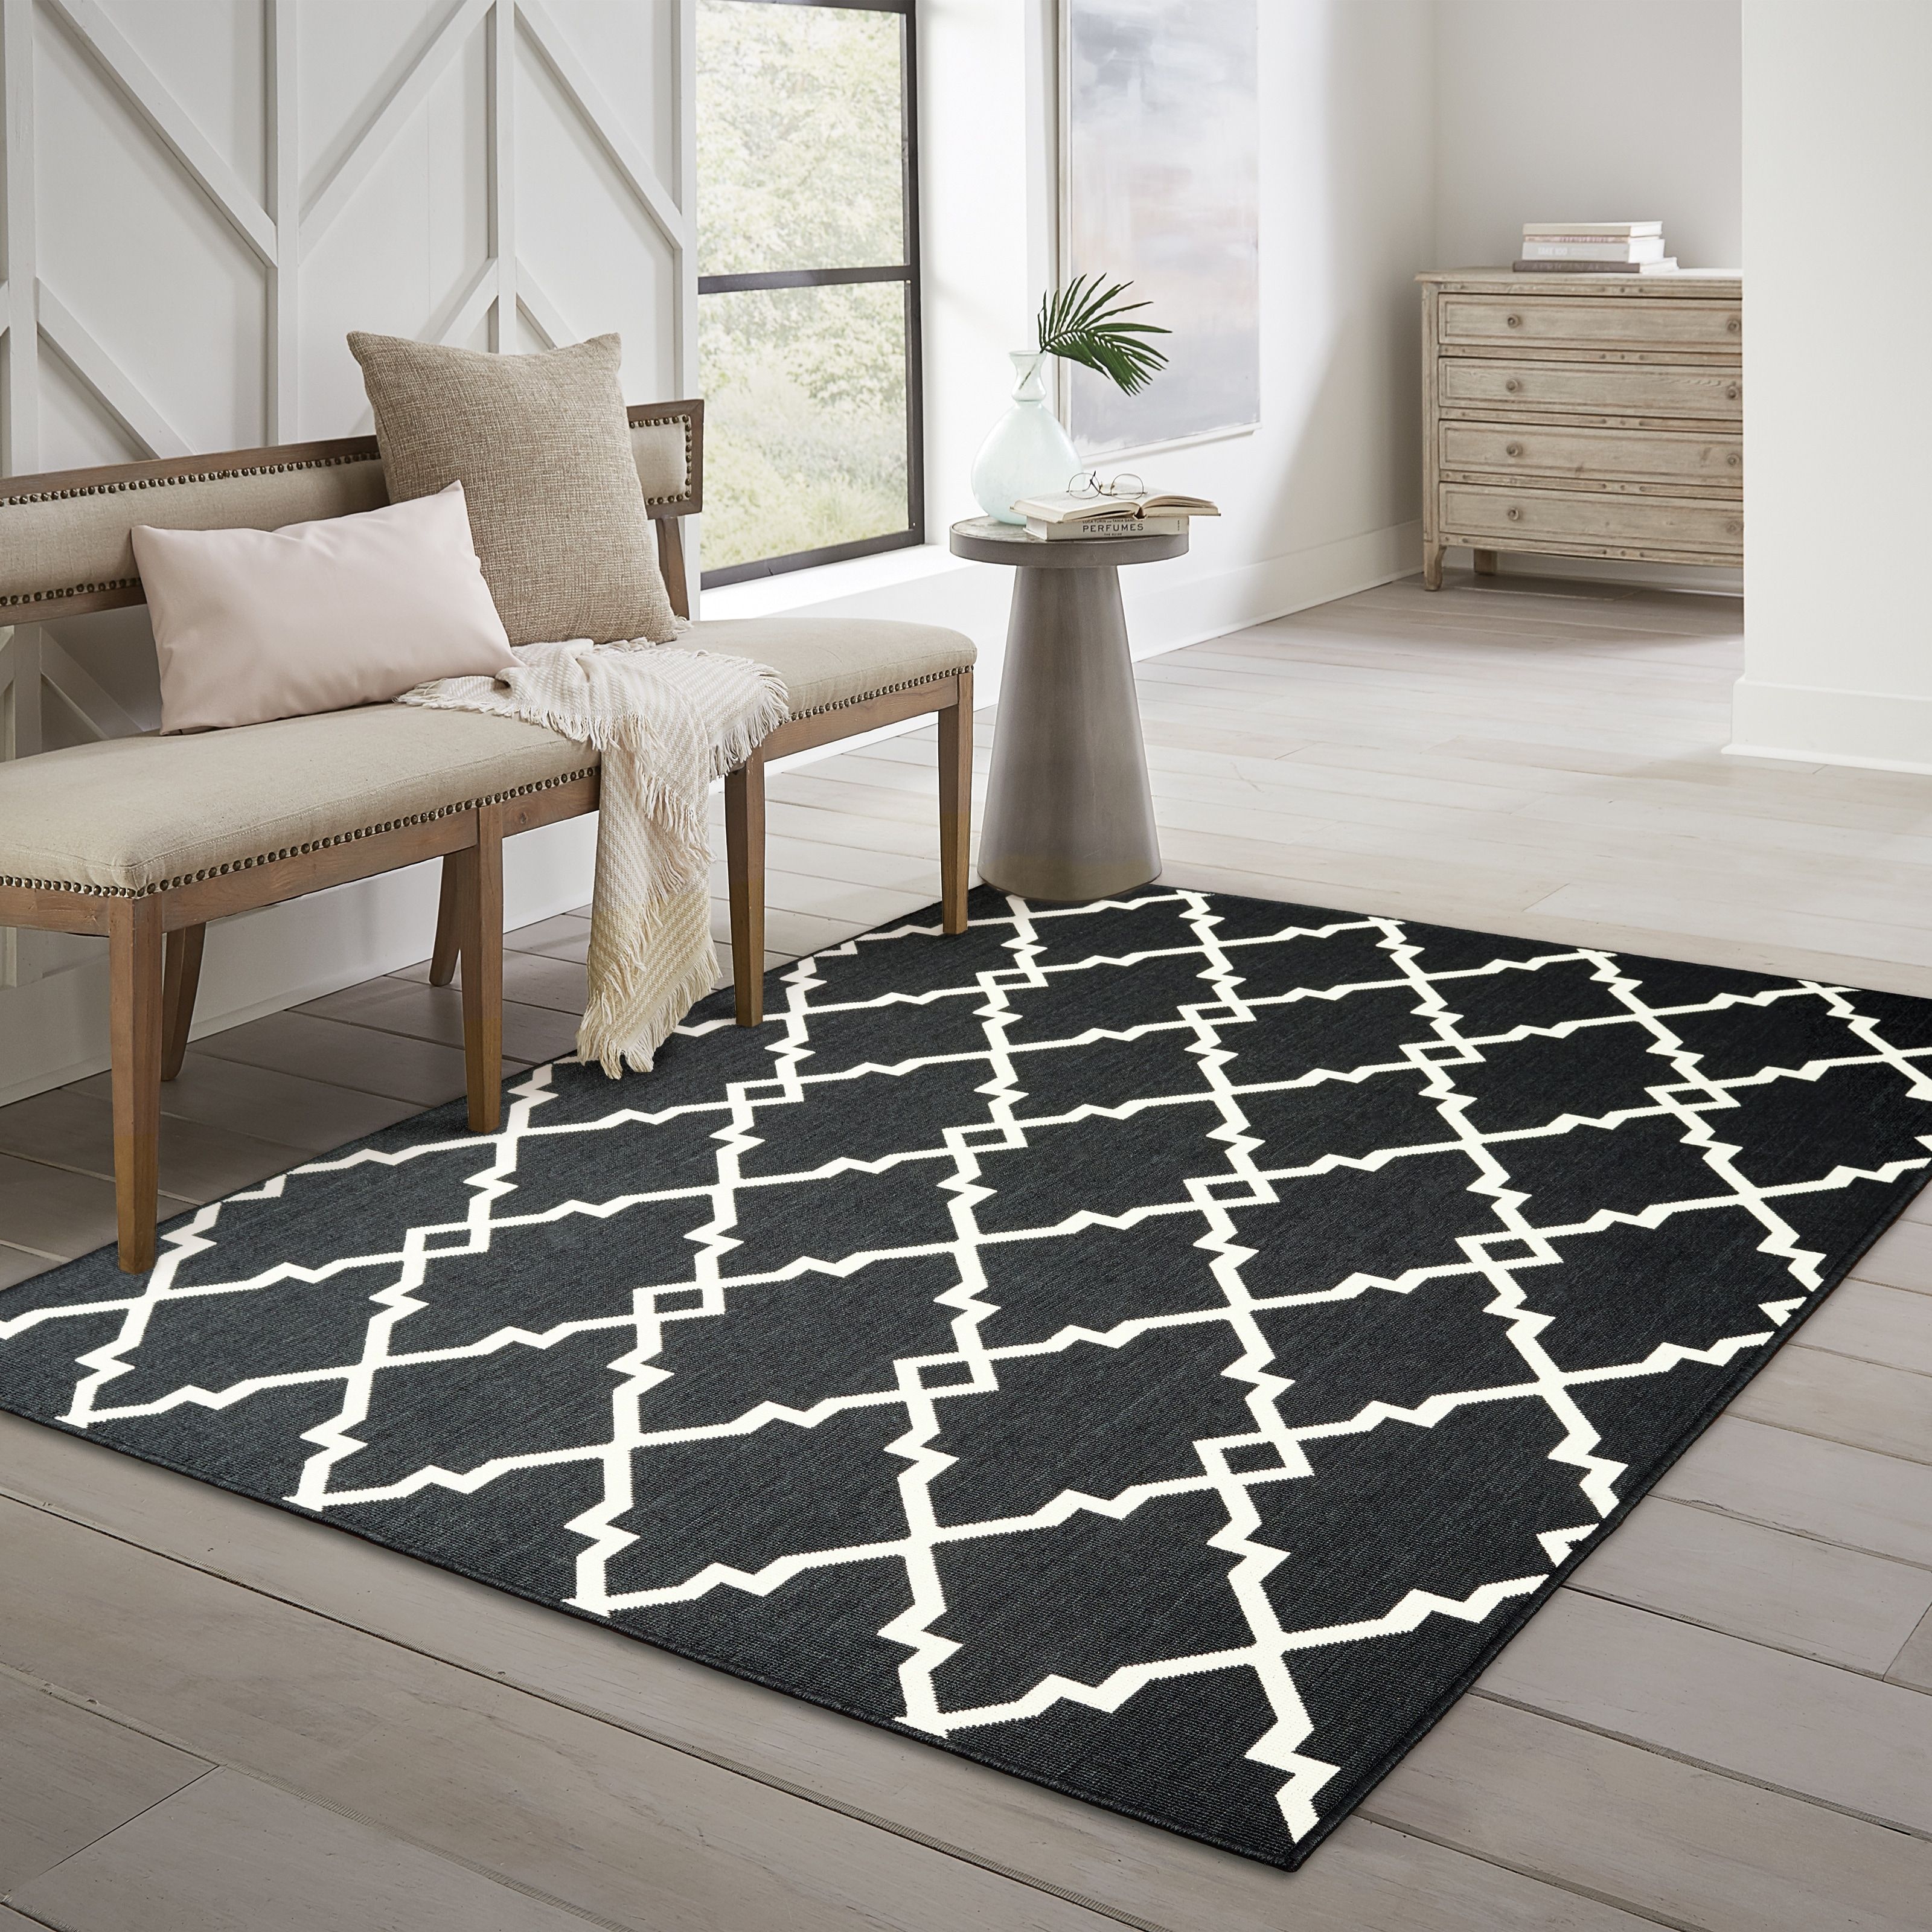 Marianna Ornate Lattice Black/ Off White Loop Pile Indoor Outdoor Area Rug  – Overstock – 21715555 Intended For Lattice Indoor Rugs (View 13 of 15)